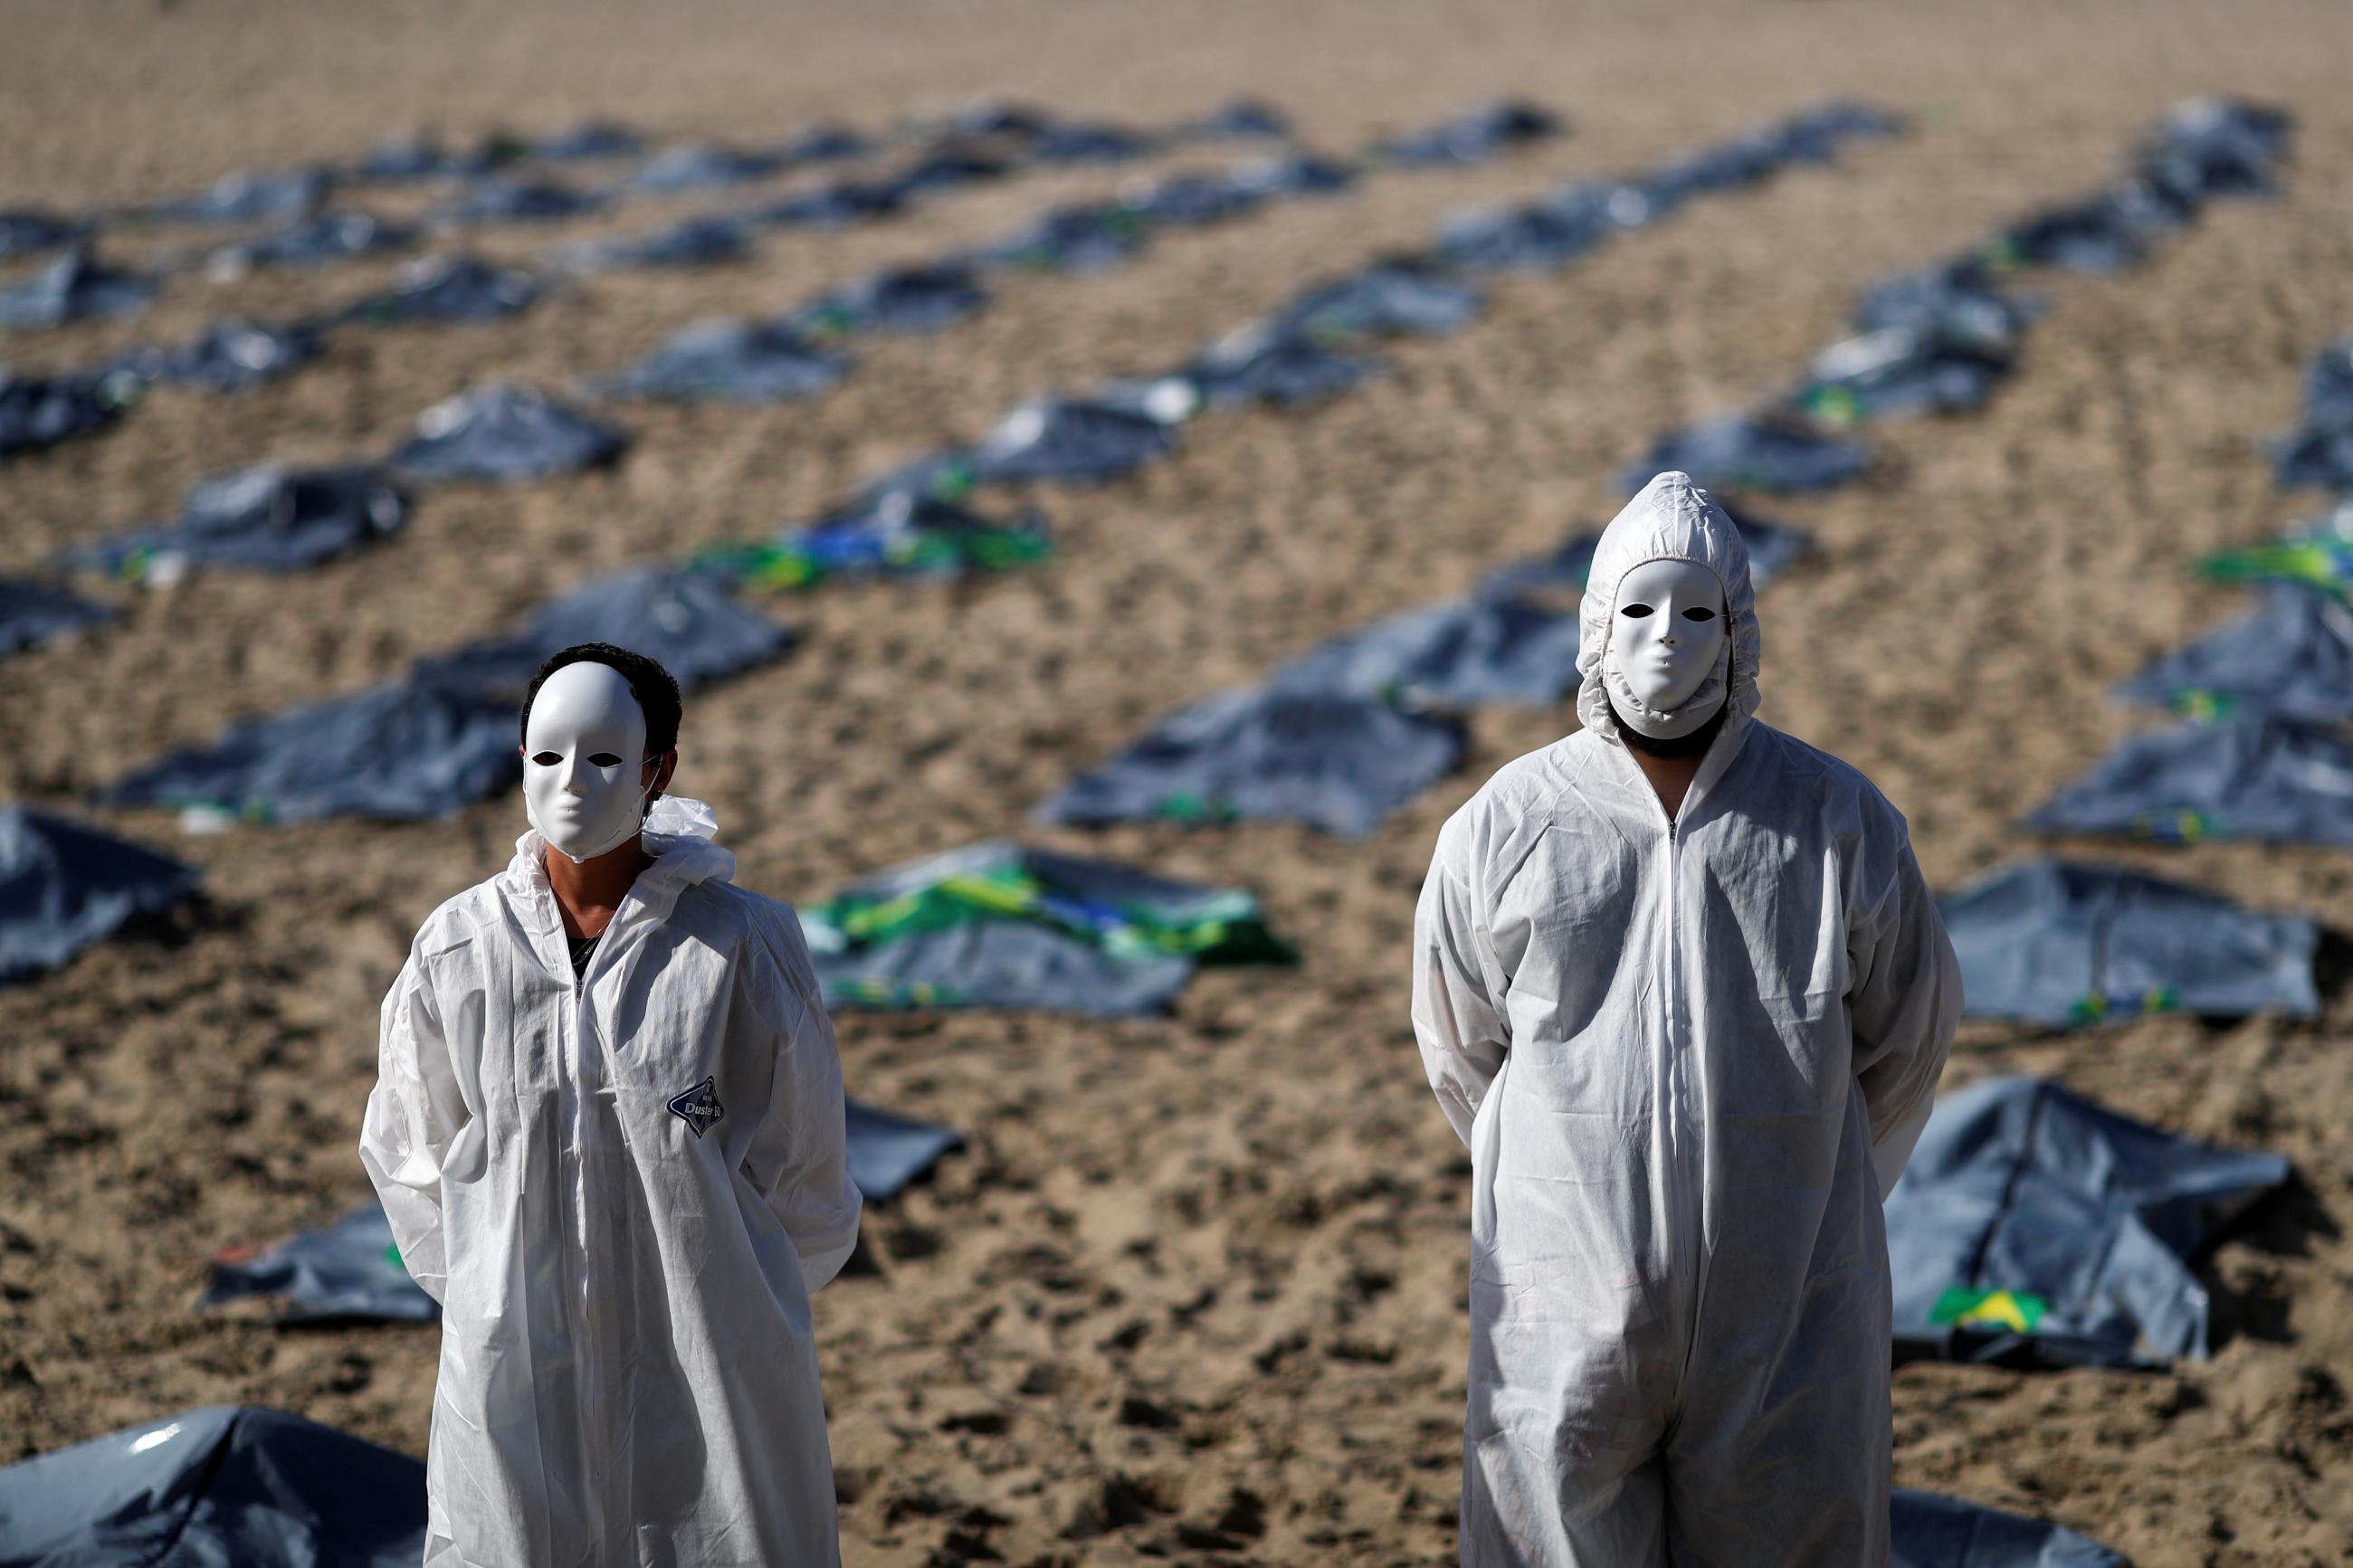 Activists from NGO Rio de Paz wear masks and PPE as they display hundreds of plastic bags, representing dead bodies, during a protest against Jair Bolsonaro's COVID-19 policies, amid the coronavirus disease (COVID-19) outbreak, in Copacabana beach, in Rio de Janeiro, Brazil, April 30, 2021.